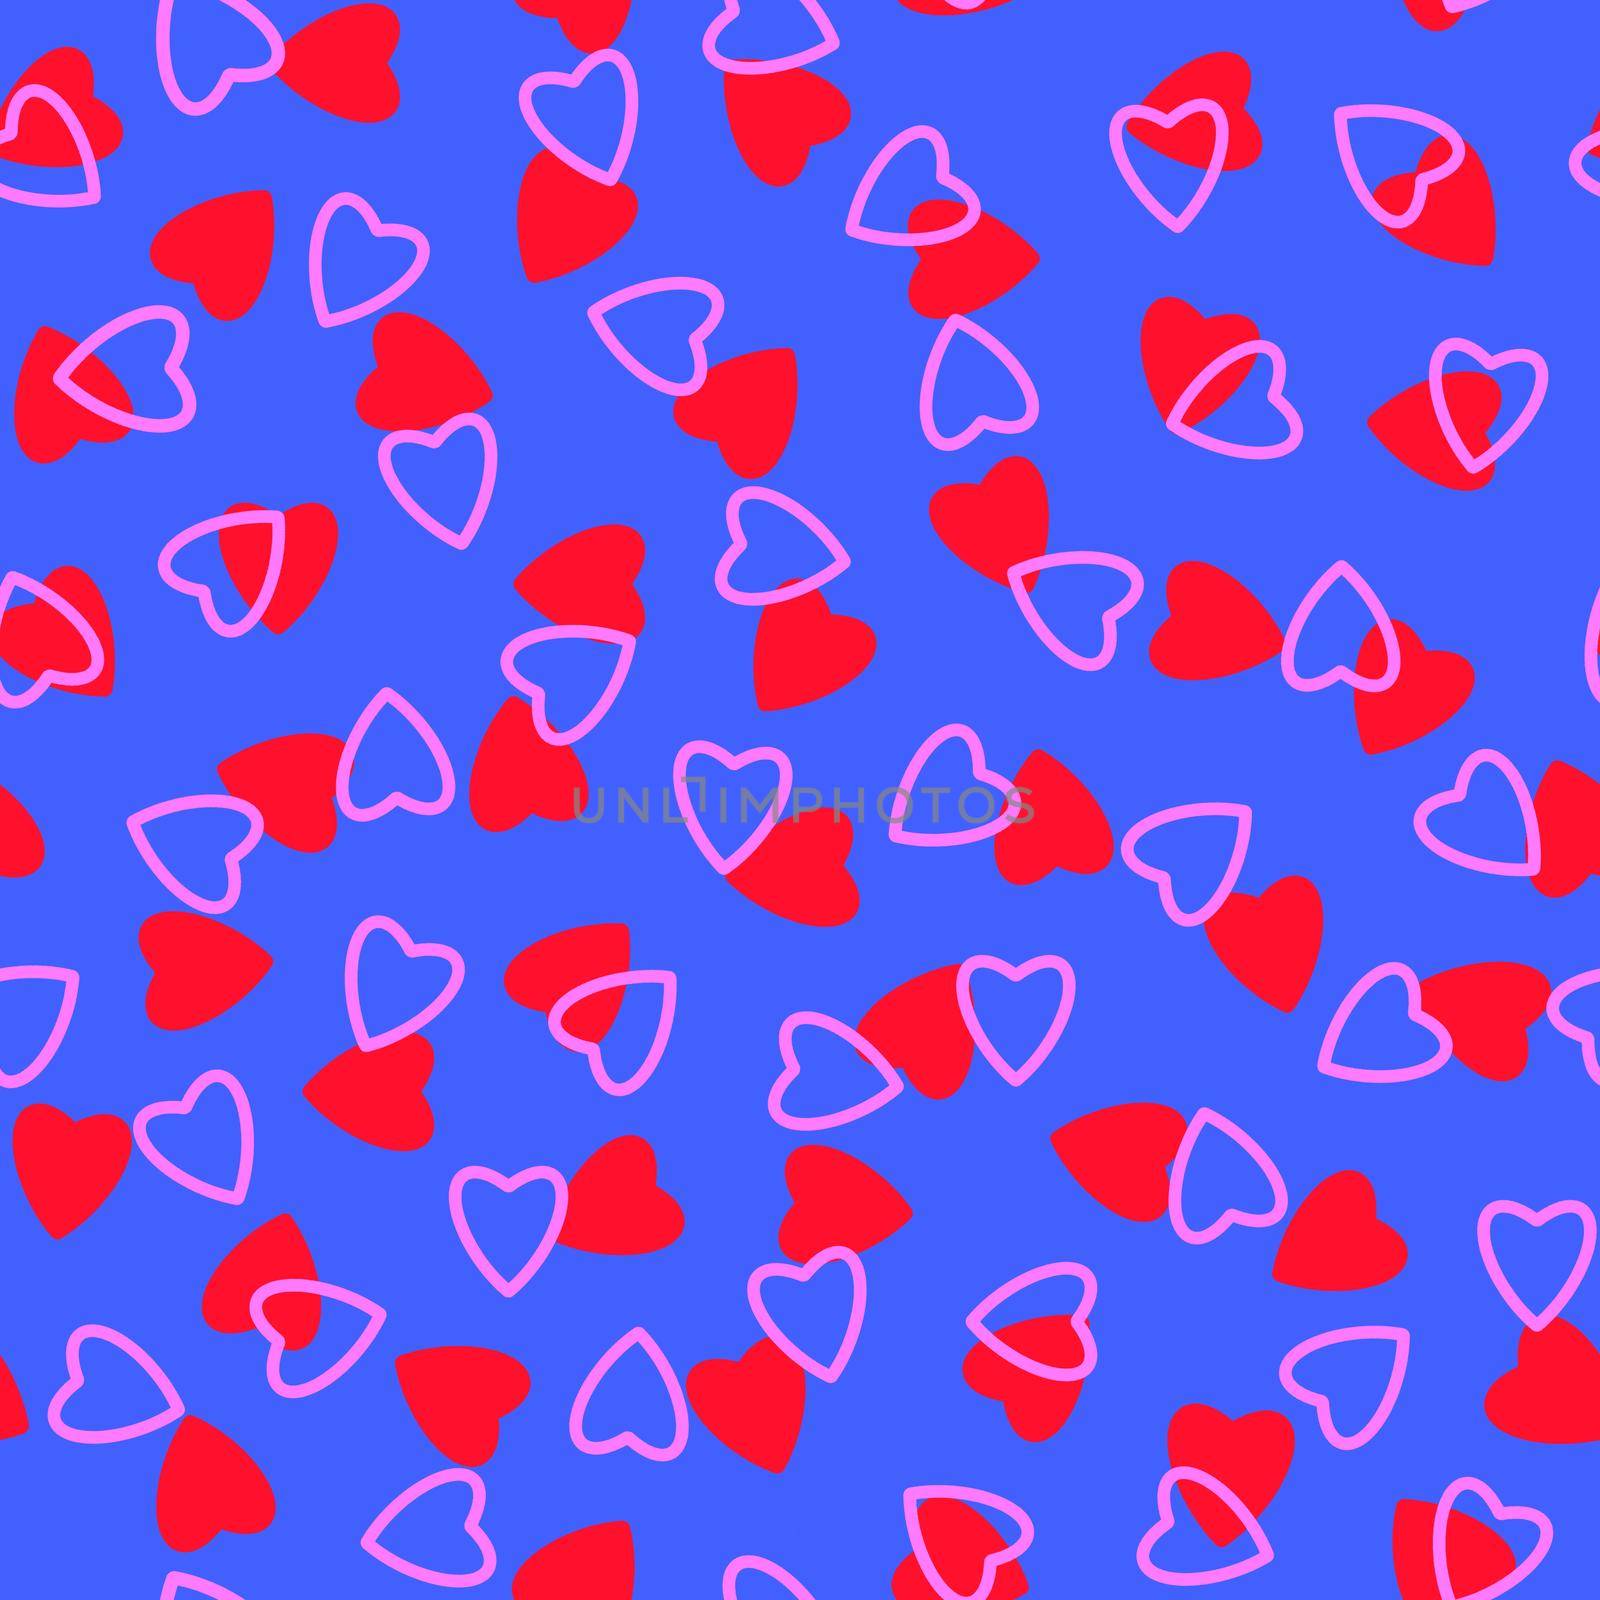 Simple hearts seamless pattern,endless chaotic texture made of tiny heart silhouettes.Valentines,mothers day background.Great for Easter,wedding,scrapbook,gift wrapping paper,textiles.Red,pink,blue by Angelsmoon